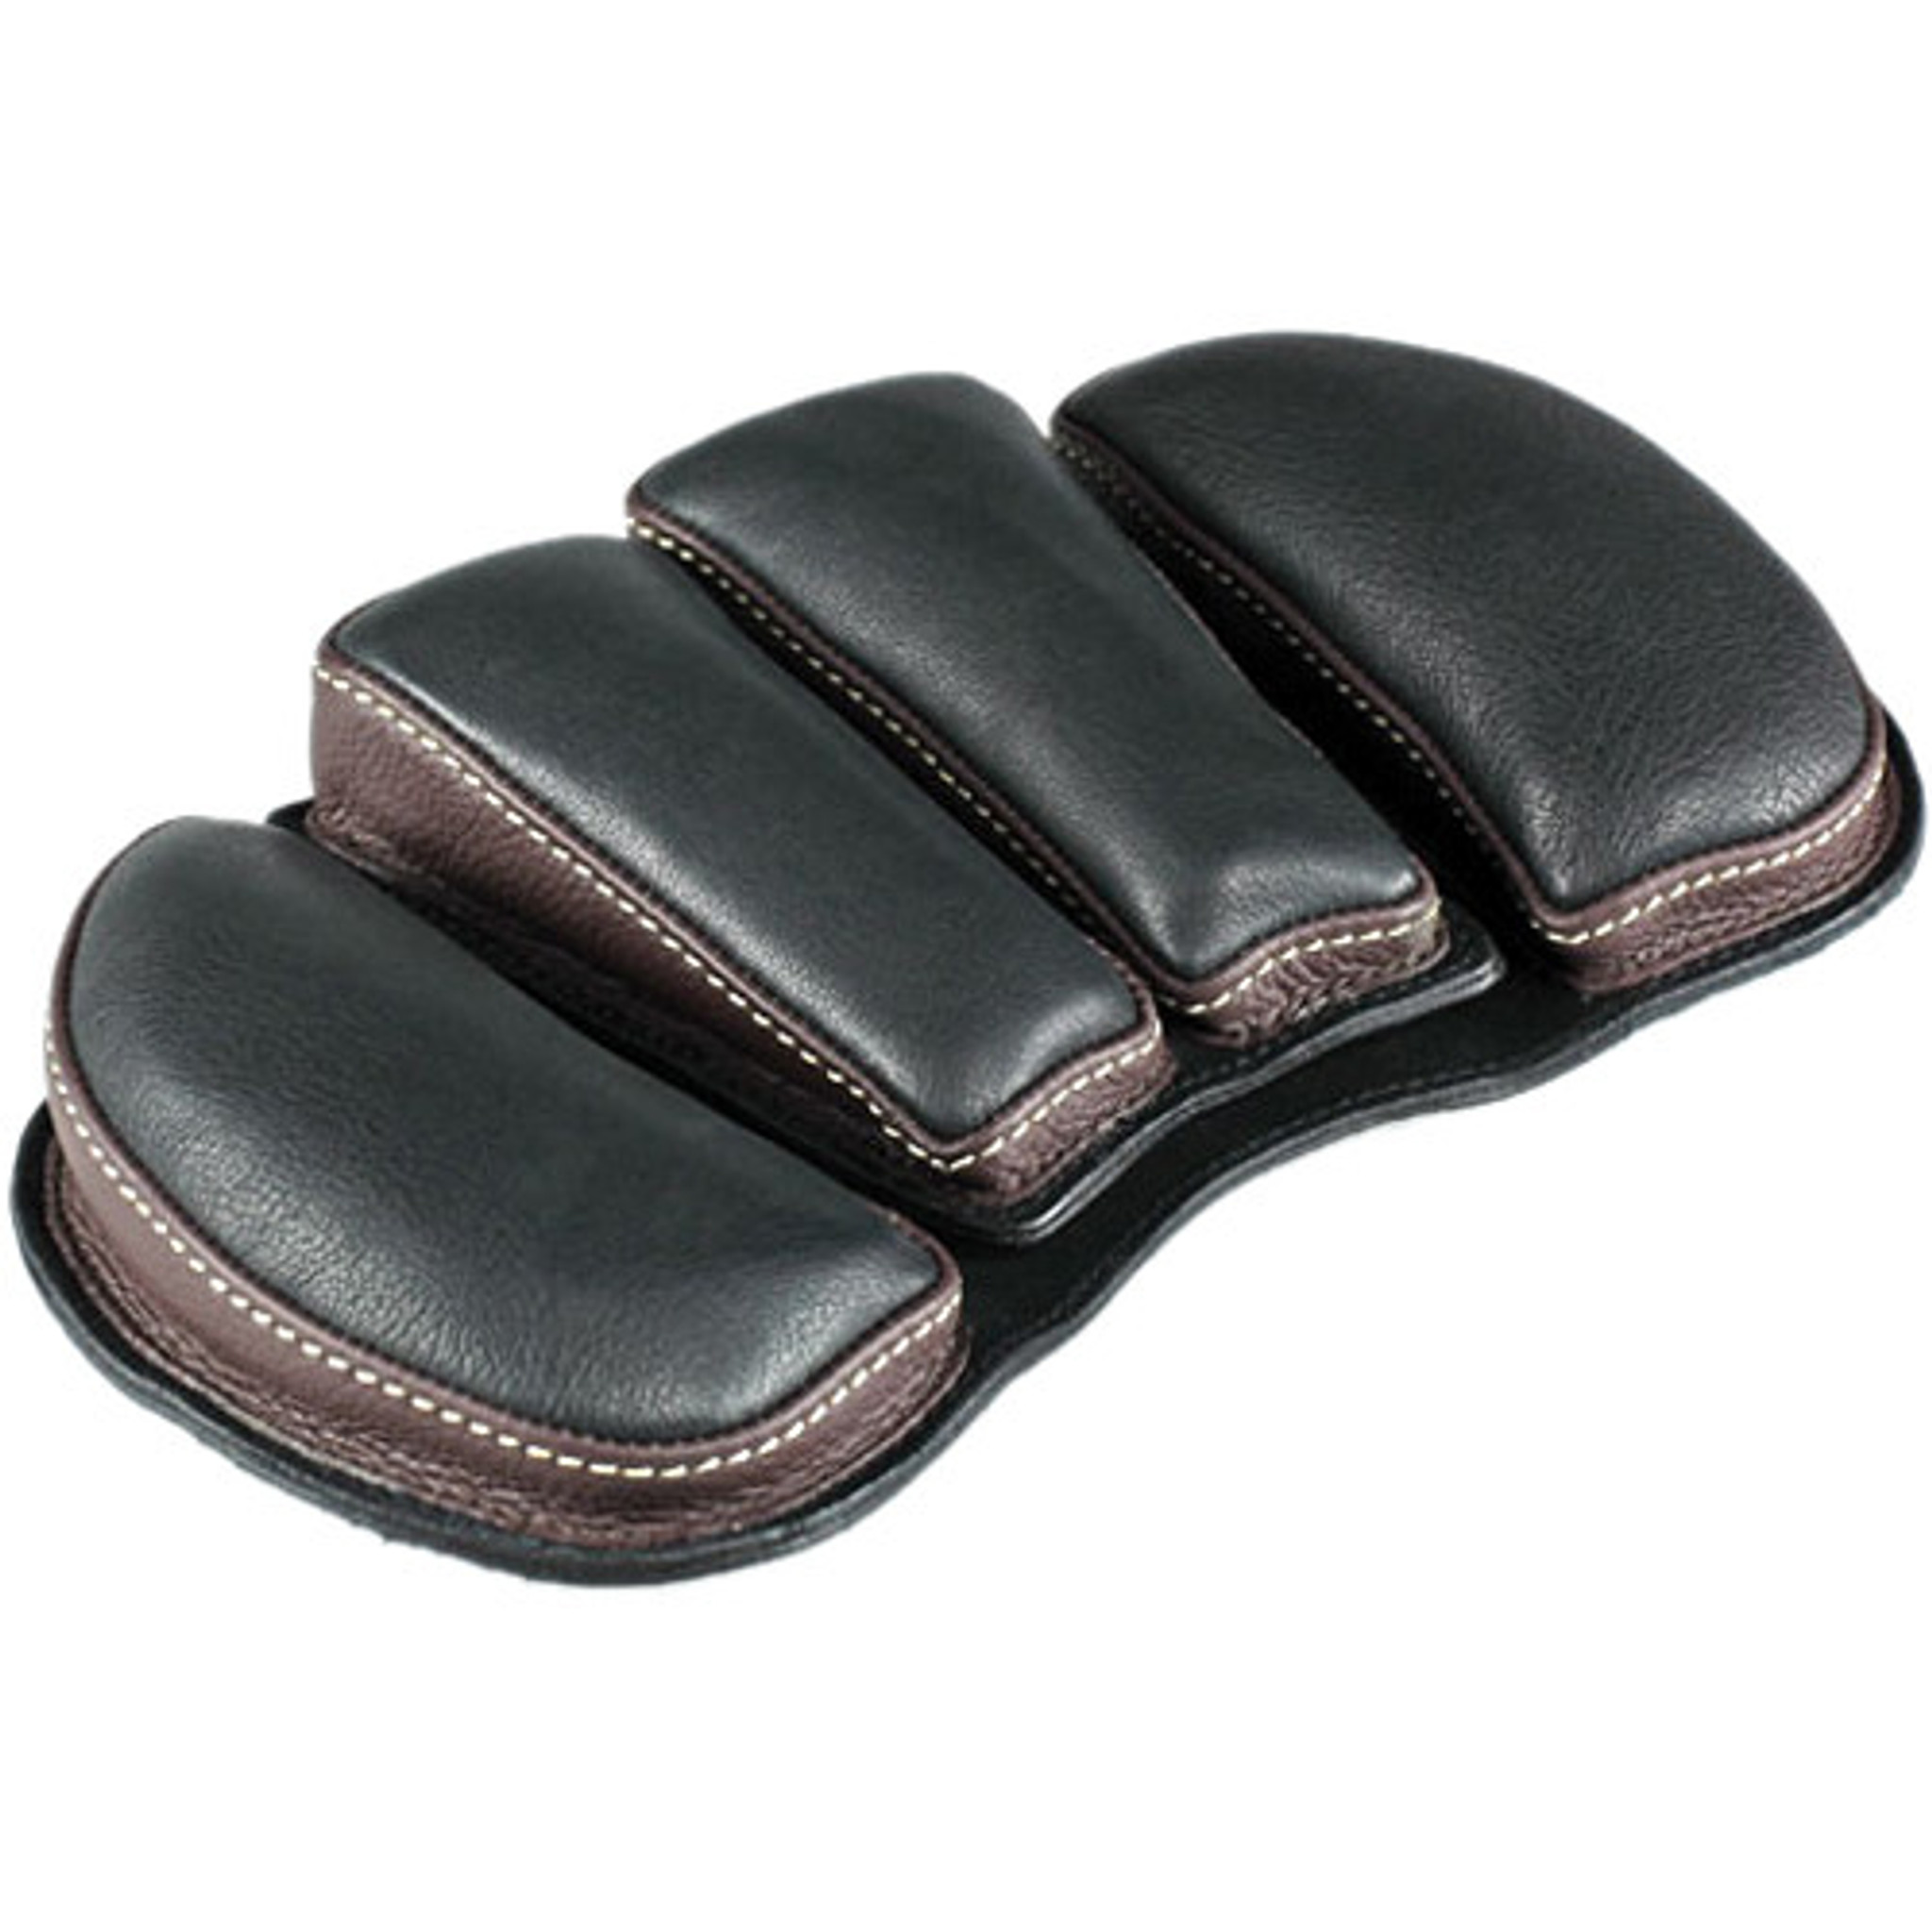 Leather Strap Pad 2023, USA Made